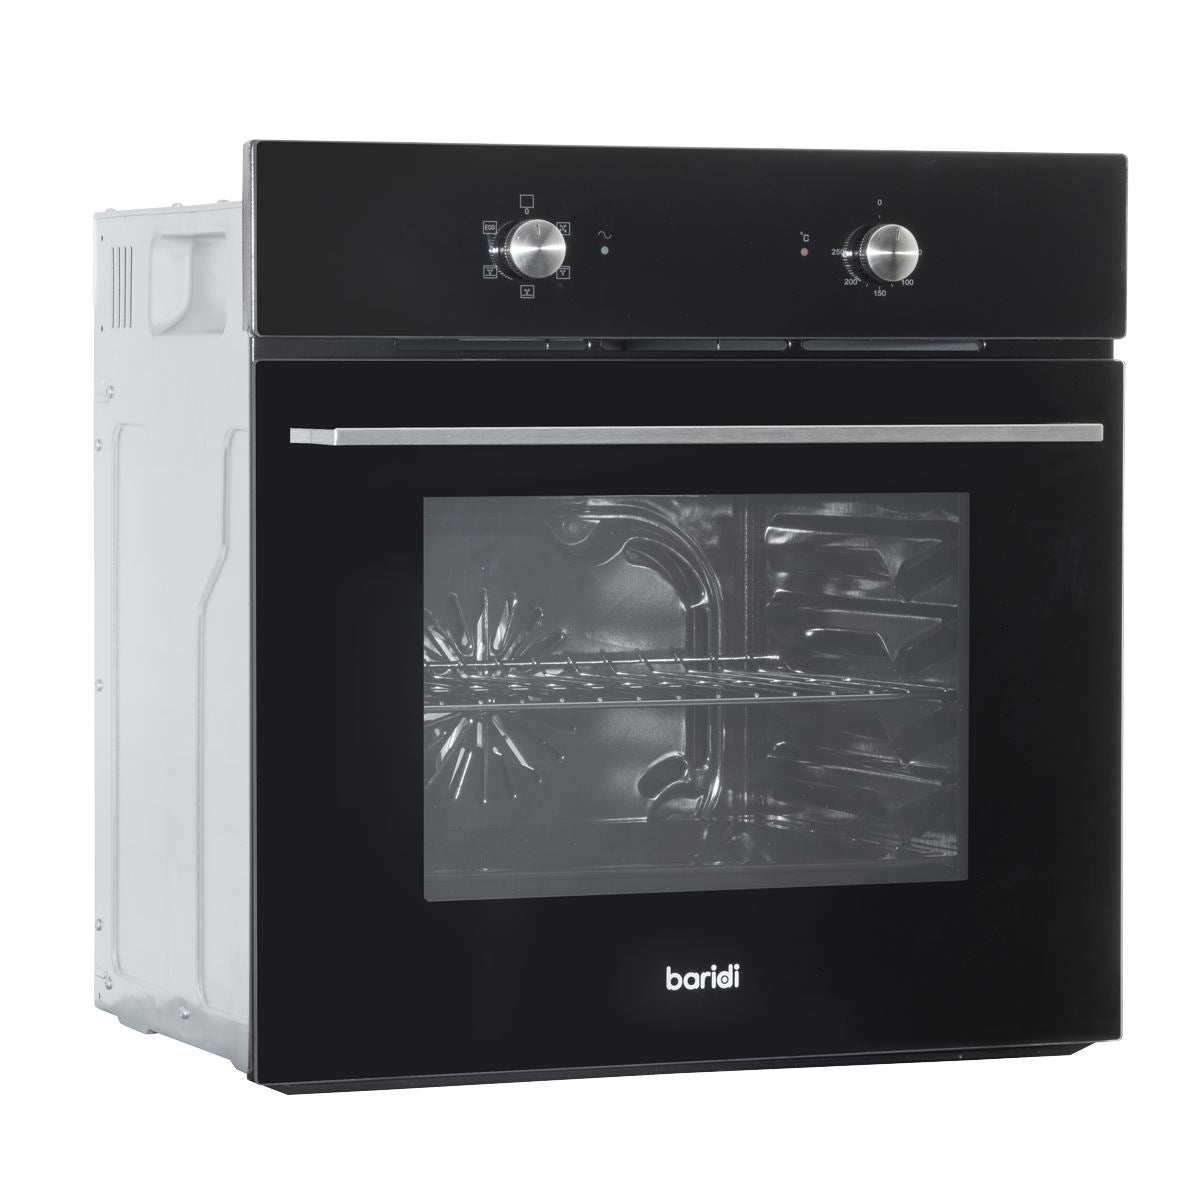 Baridi 60cm Built-In Five Function Fan Assisted Oven, 55L Capacity, Black